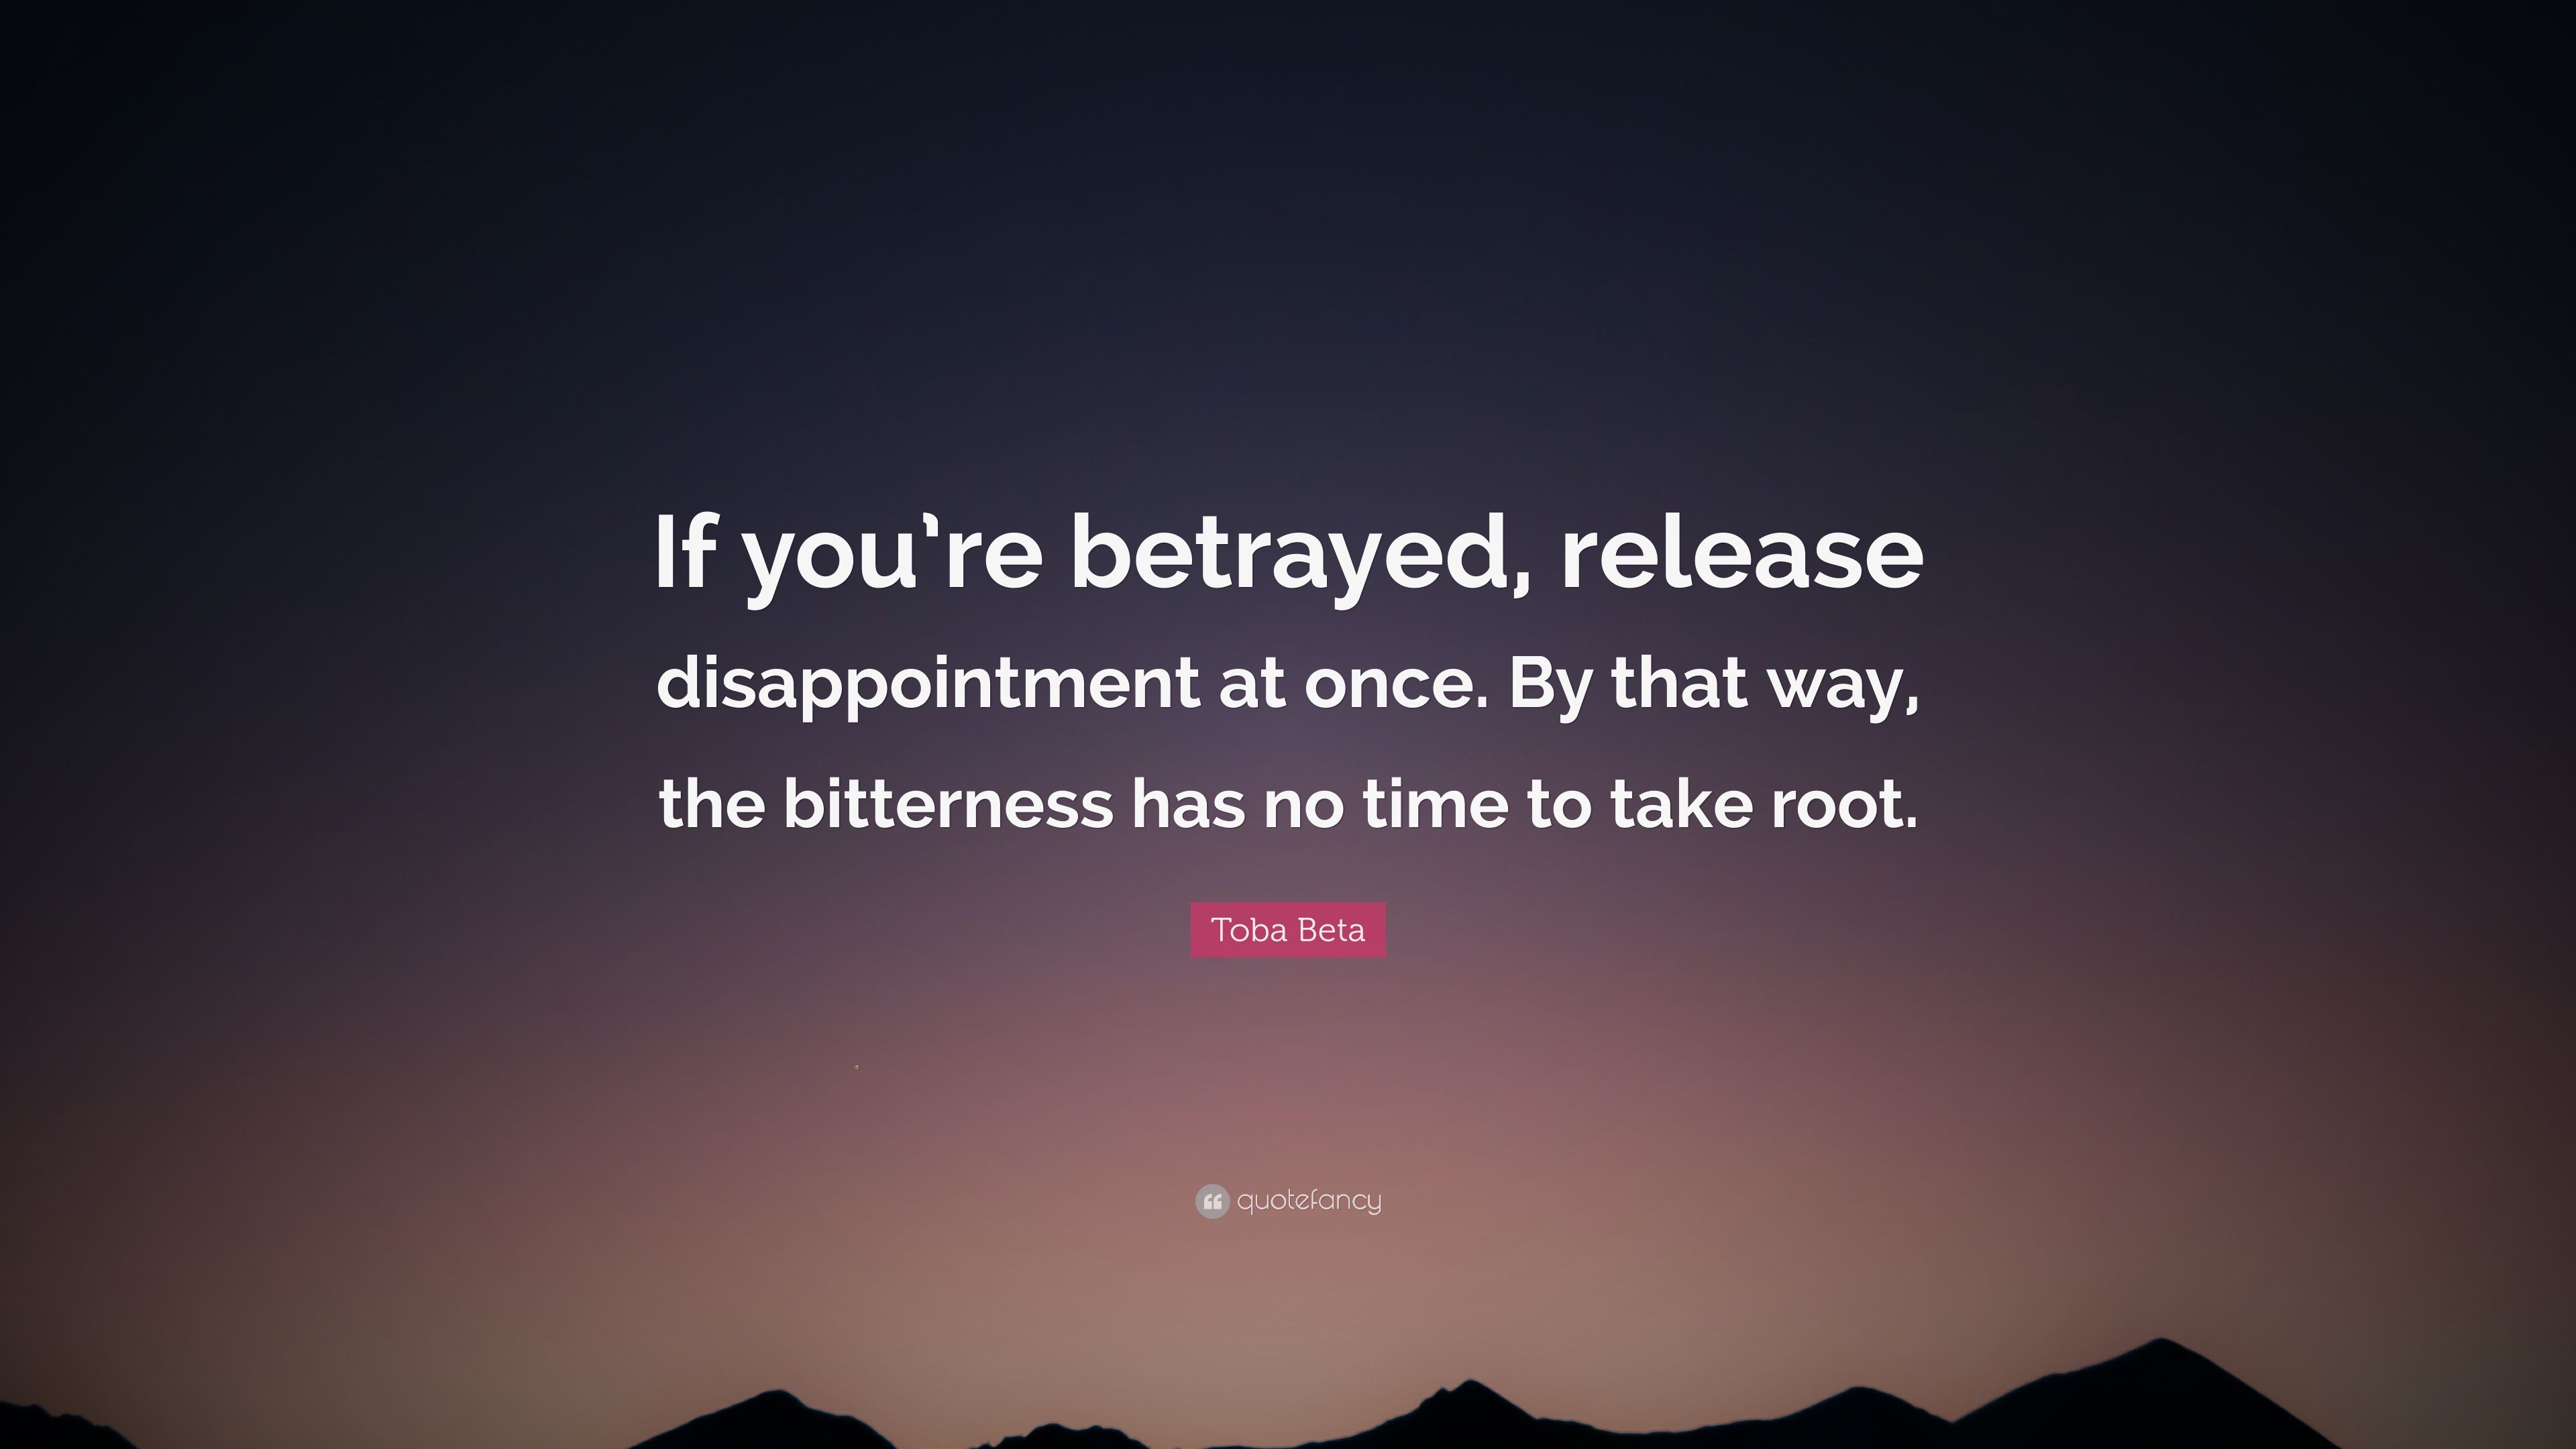 Toba Beta Quote: “If you're betrayed, release disappointment at once. By that way, the bitterness has no time to take root.” (10 wallpaper)